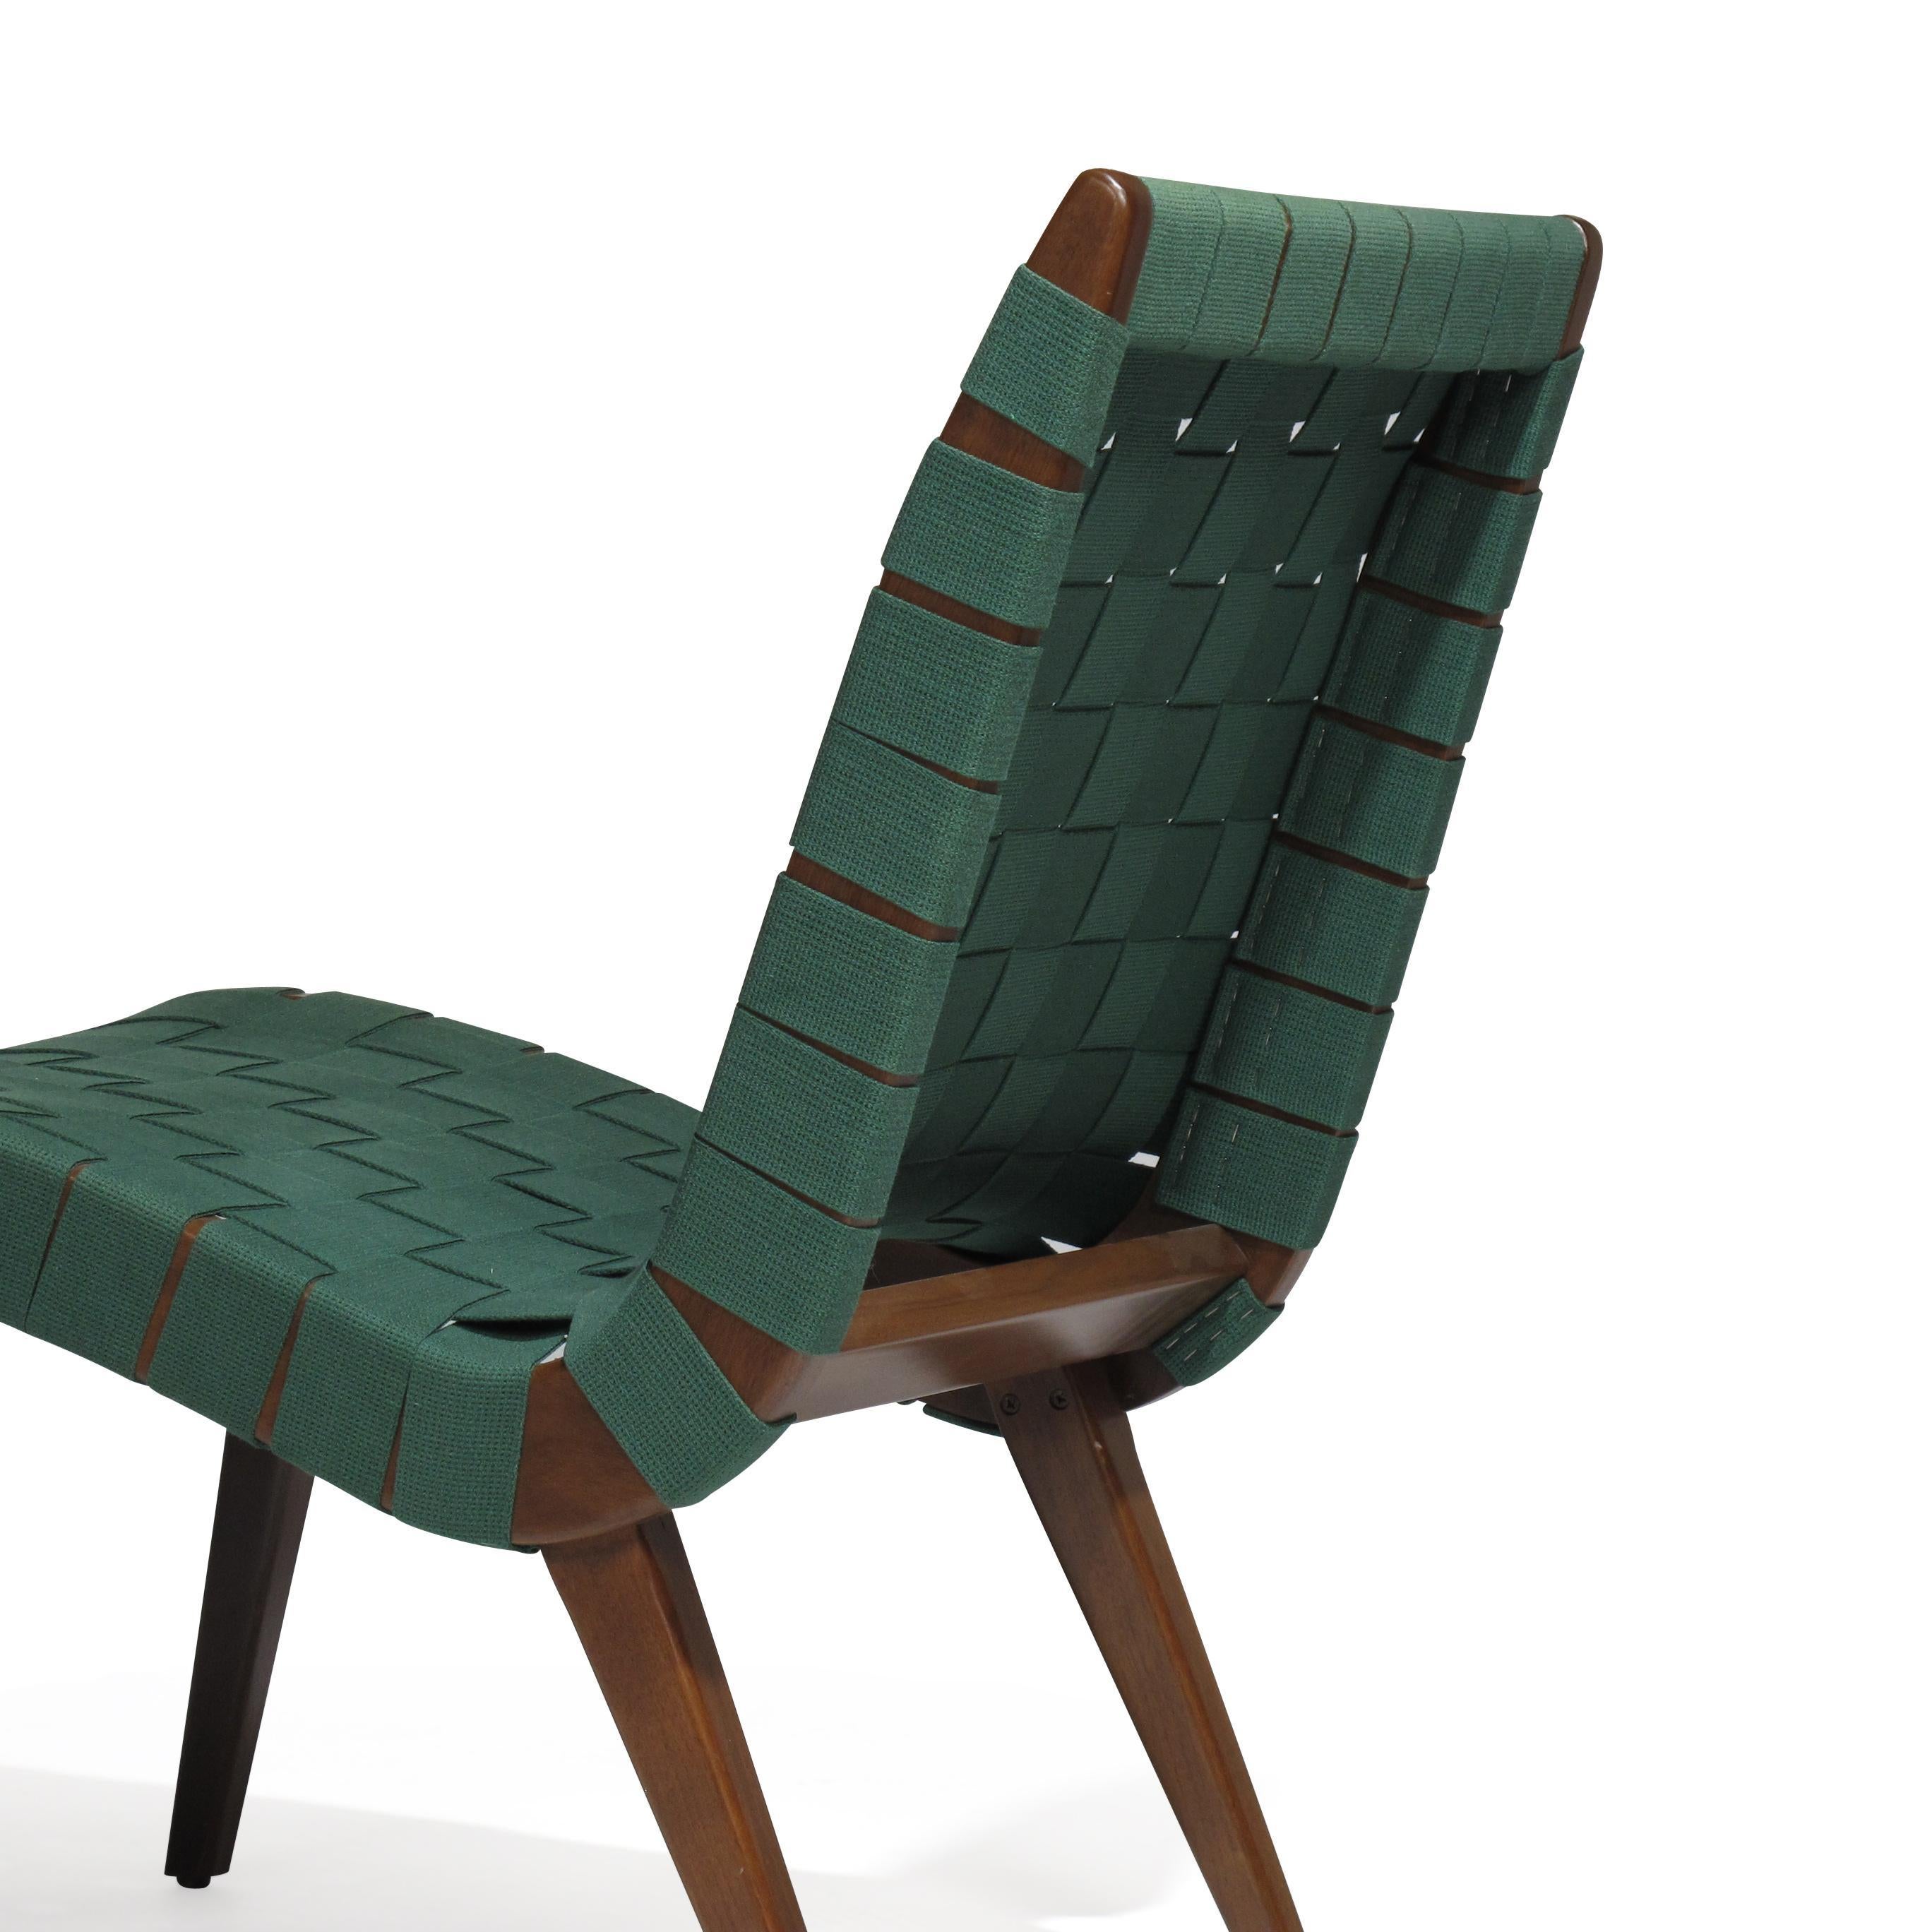 Contemporary Jens Risom for Knoll Studio Lounge Chairs